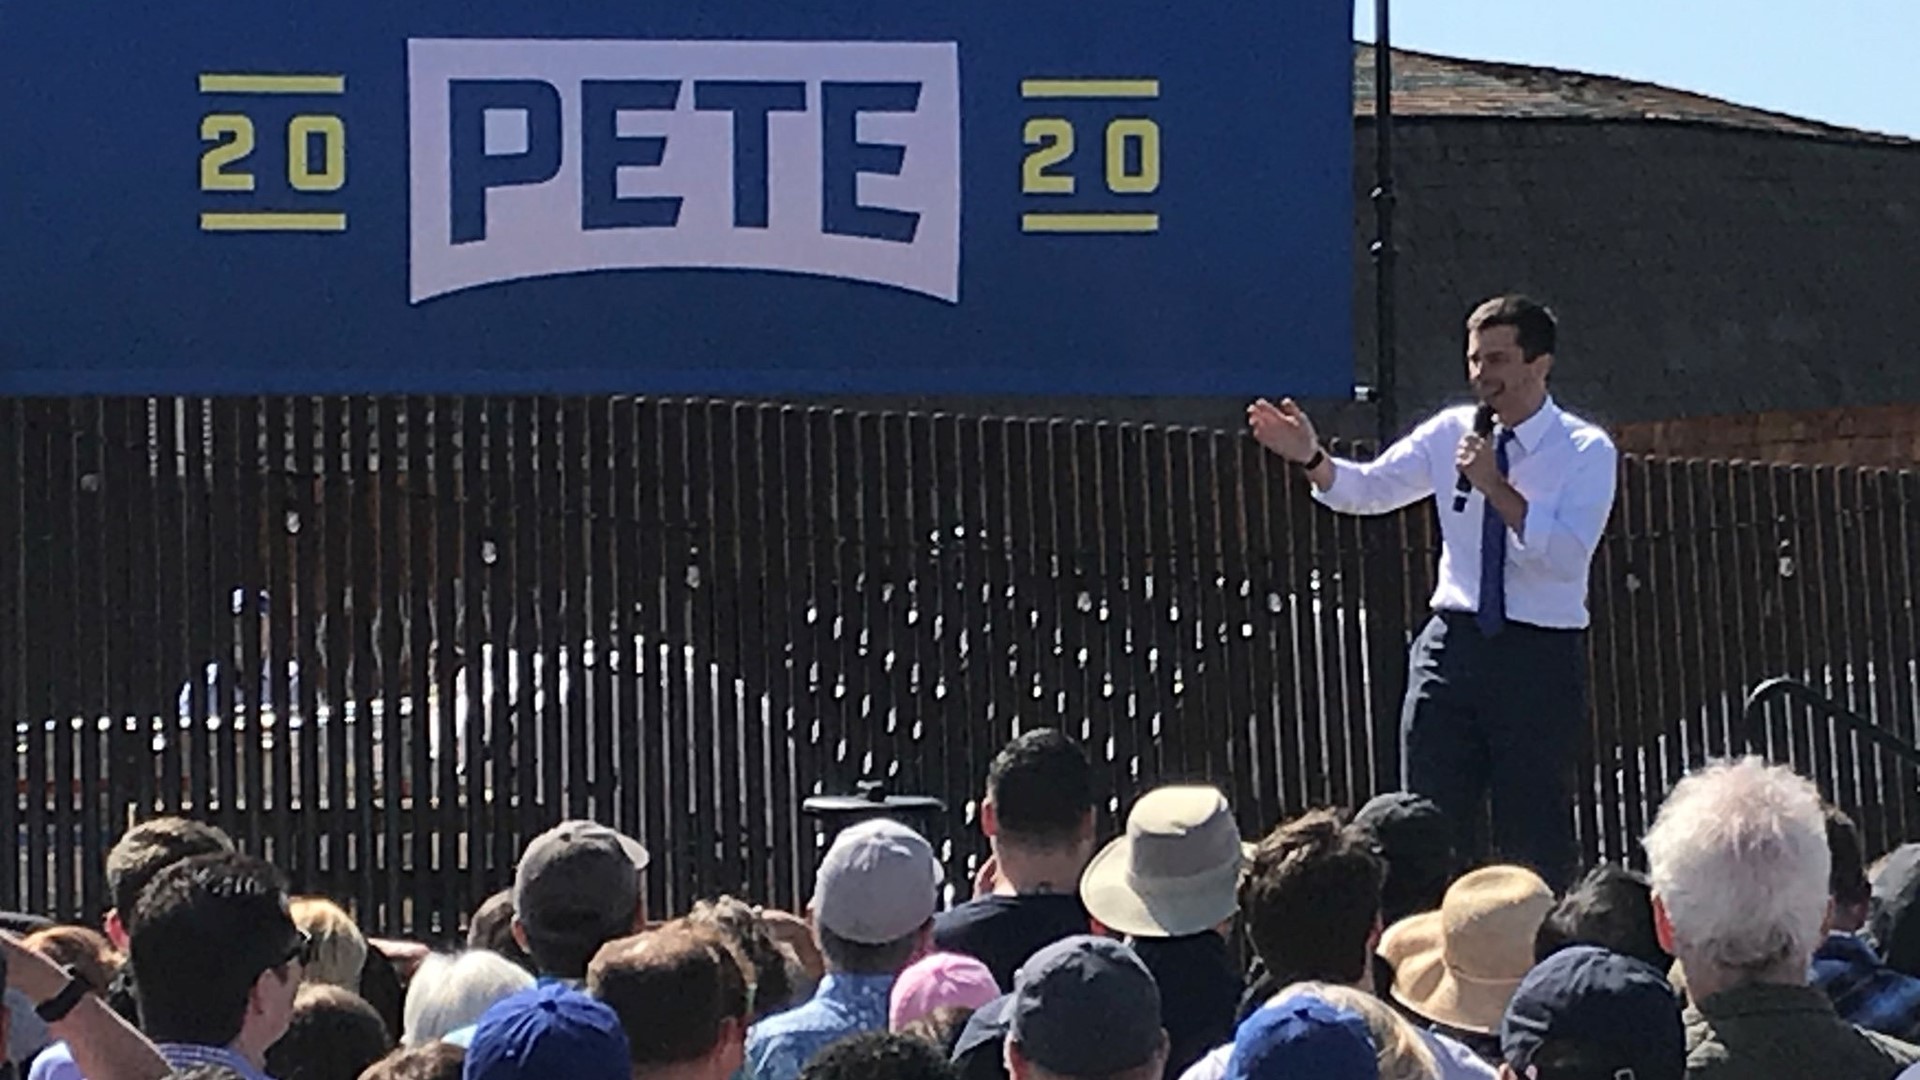 Democratic presidential candidate Mayor Pete Buttigieg made a campaign stop in West Sacramento Sunday afternoon at Drake's Brewing Co.